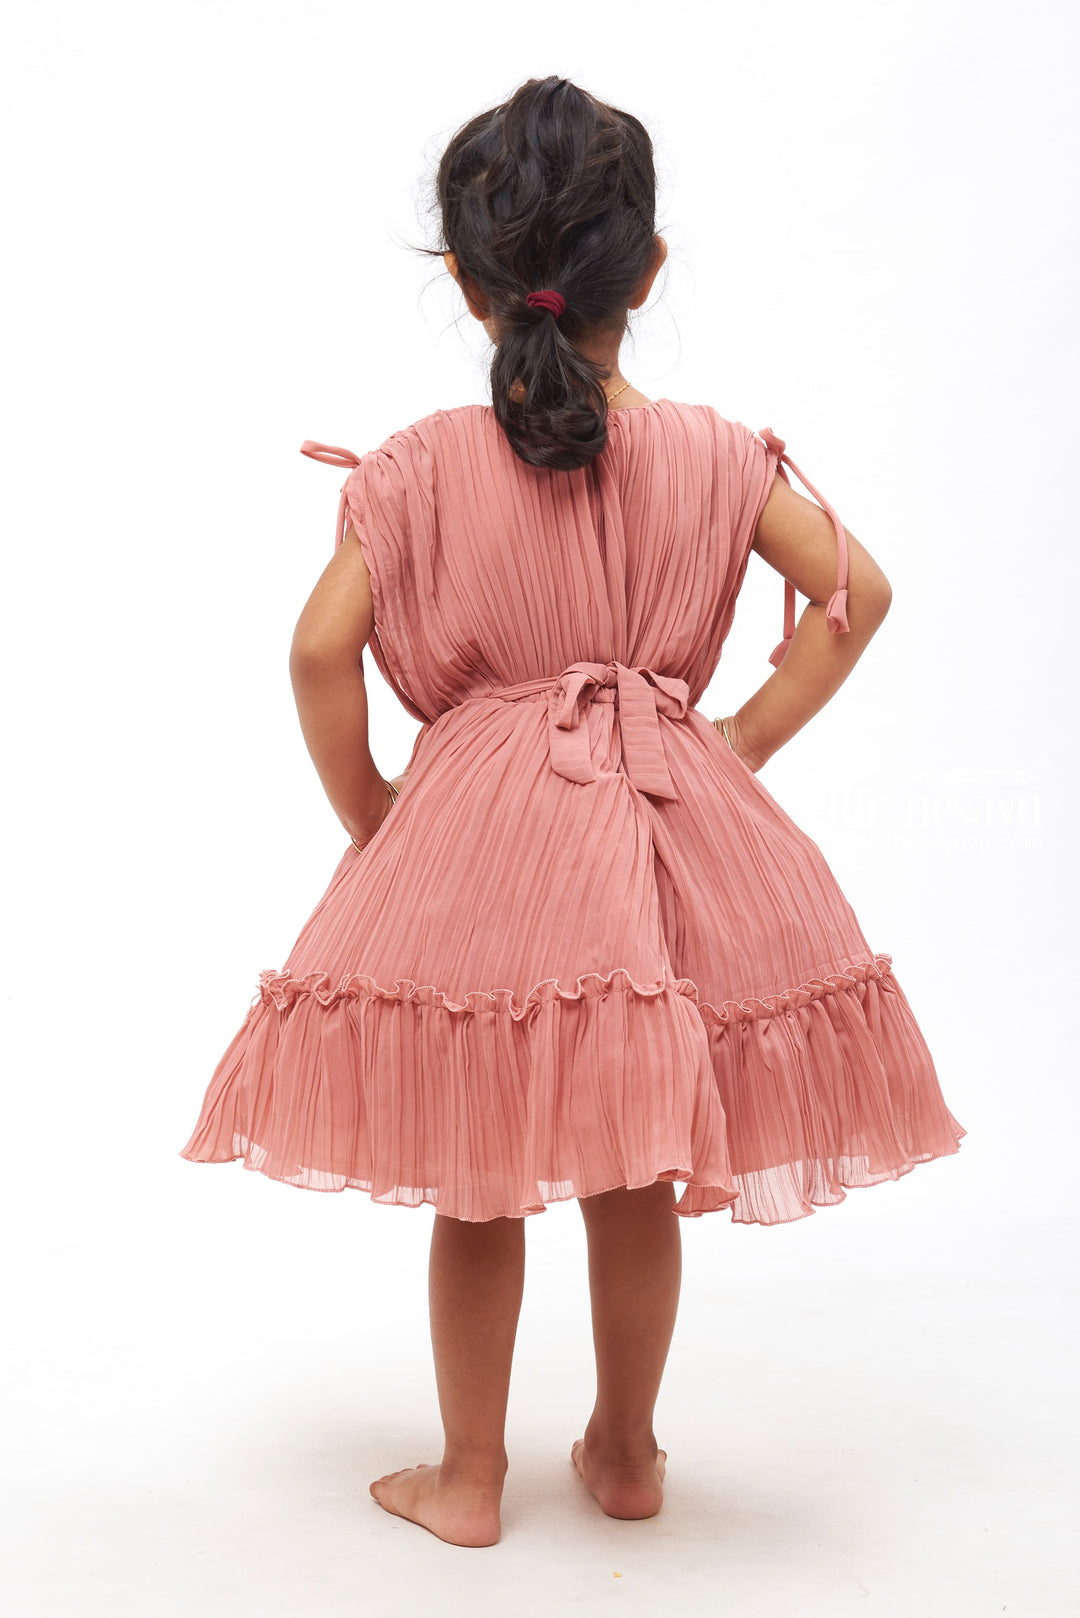 The Nesavu Girls Fancy Party Frock Girls Soft Pink Pleated Georgette Partywear Dress with Fashionable Poncho Sleeves Nesavu Girls Designer Party Frocks | Latest Fashion Trends | The Nesavu